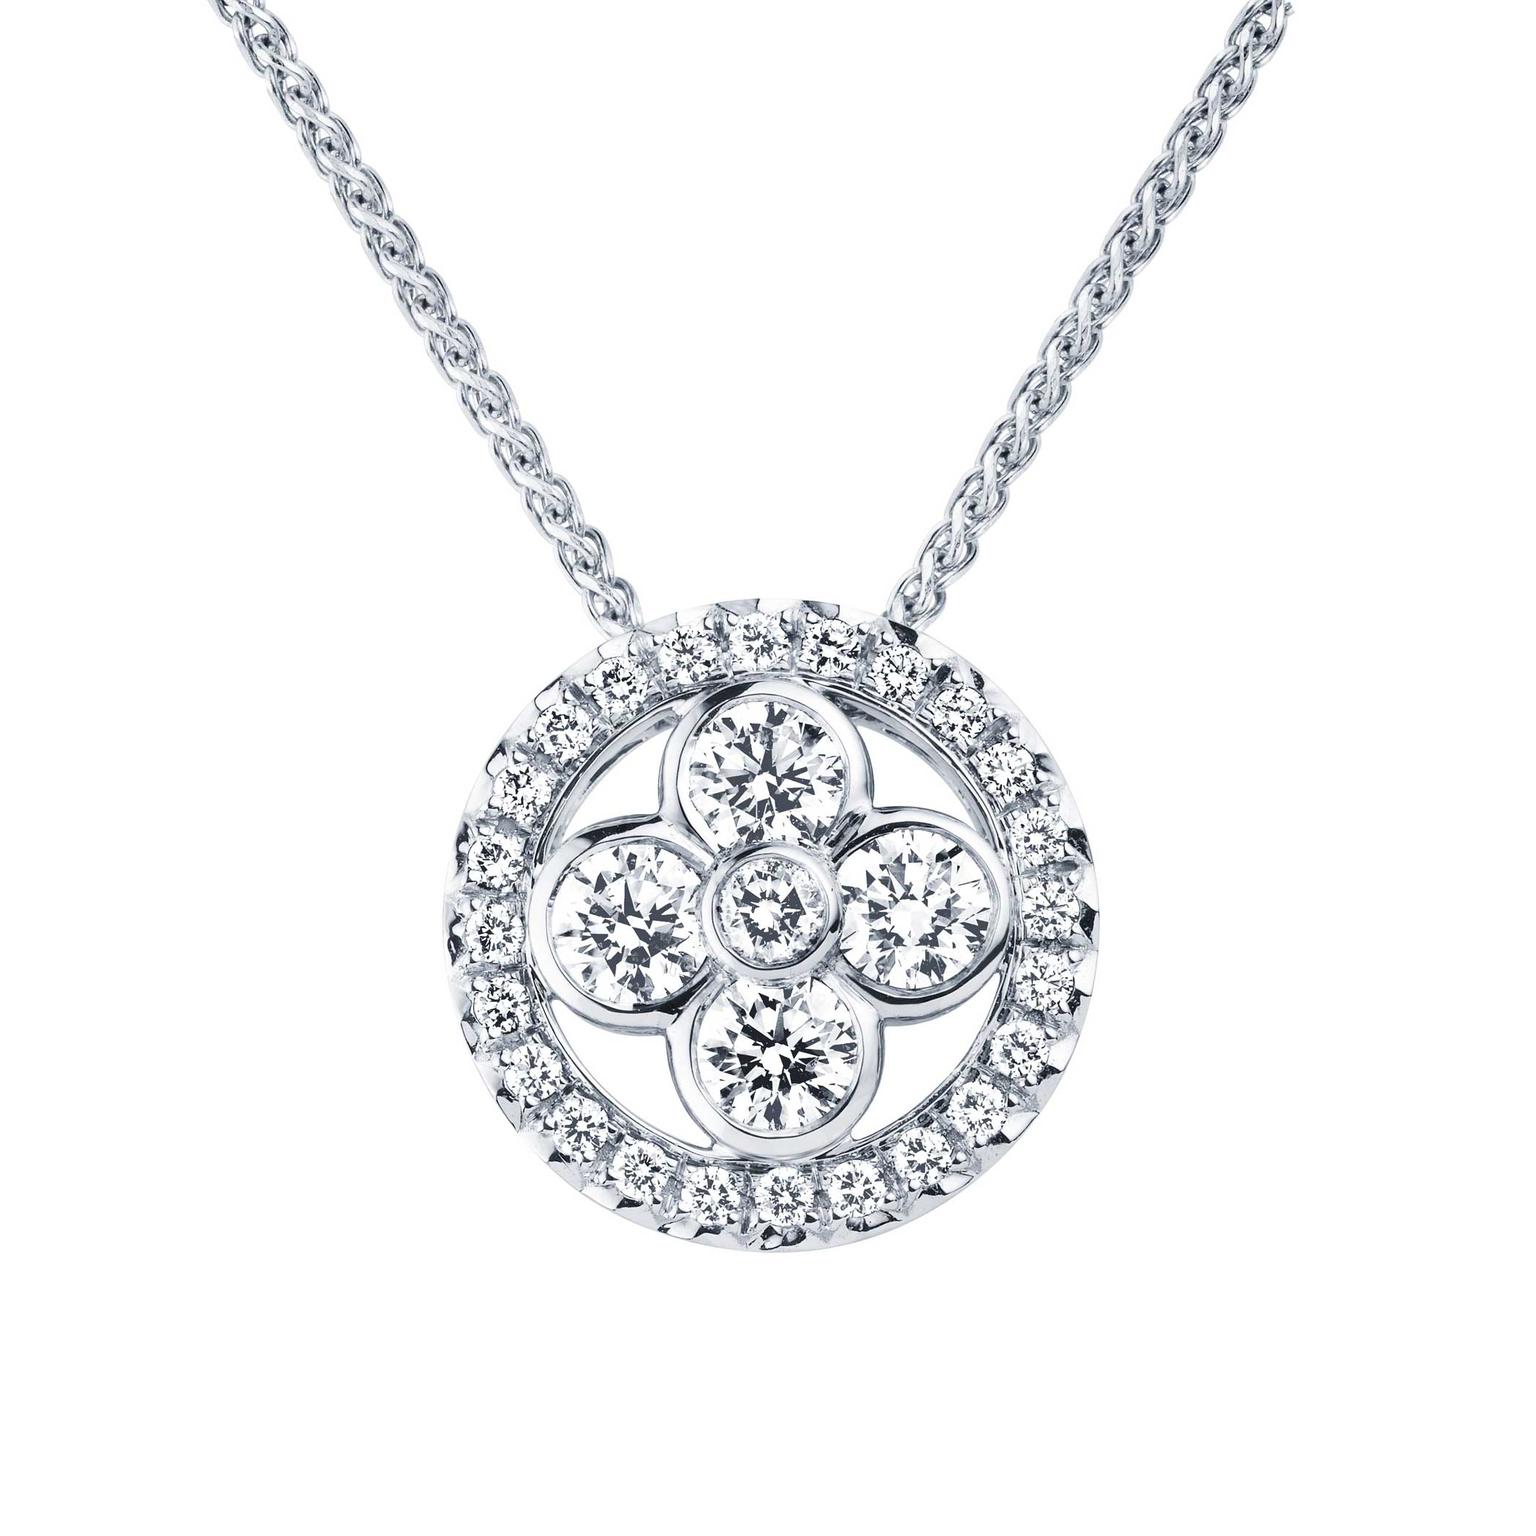 Louis Vuitton Monogram Sun and Stars collection Sun pendant necklace in white gold_zoom